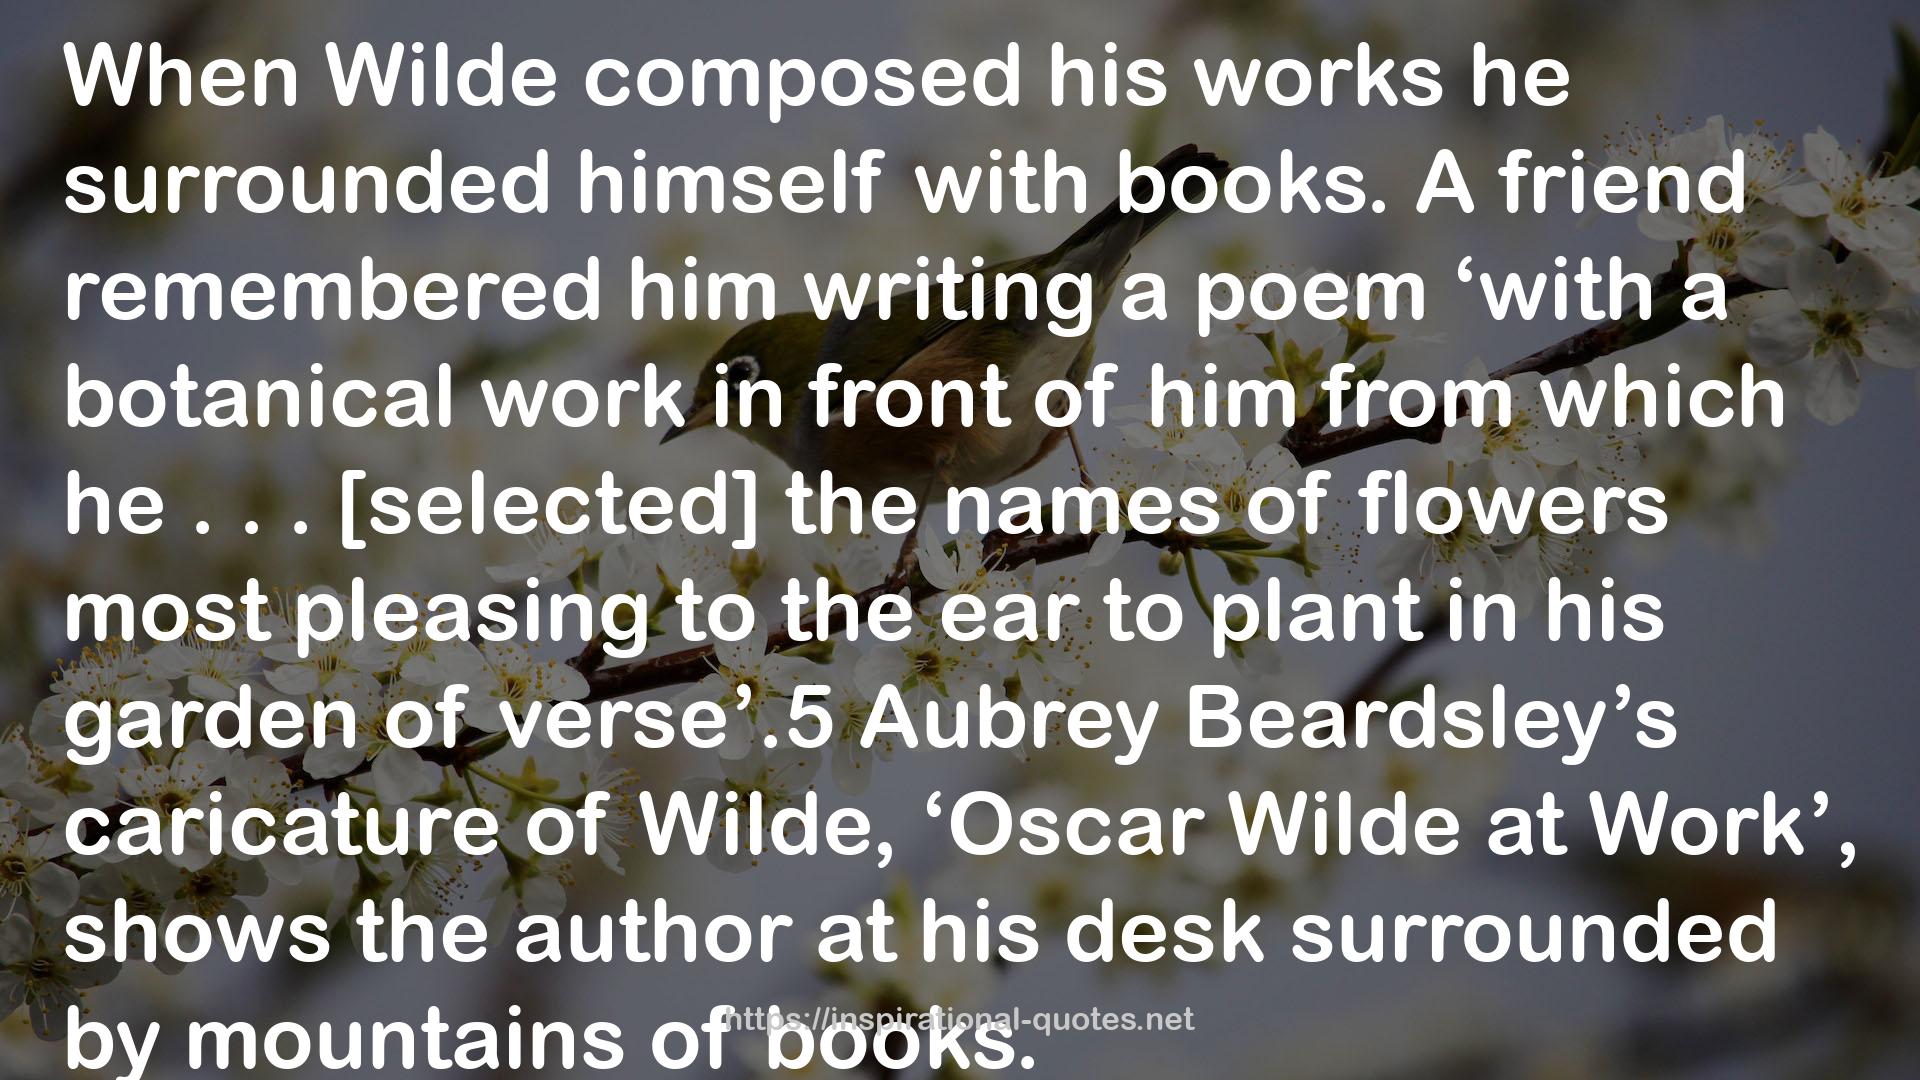 Built of Books: How Reading Defined the Life of Oscar Wilde QUOTES